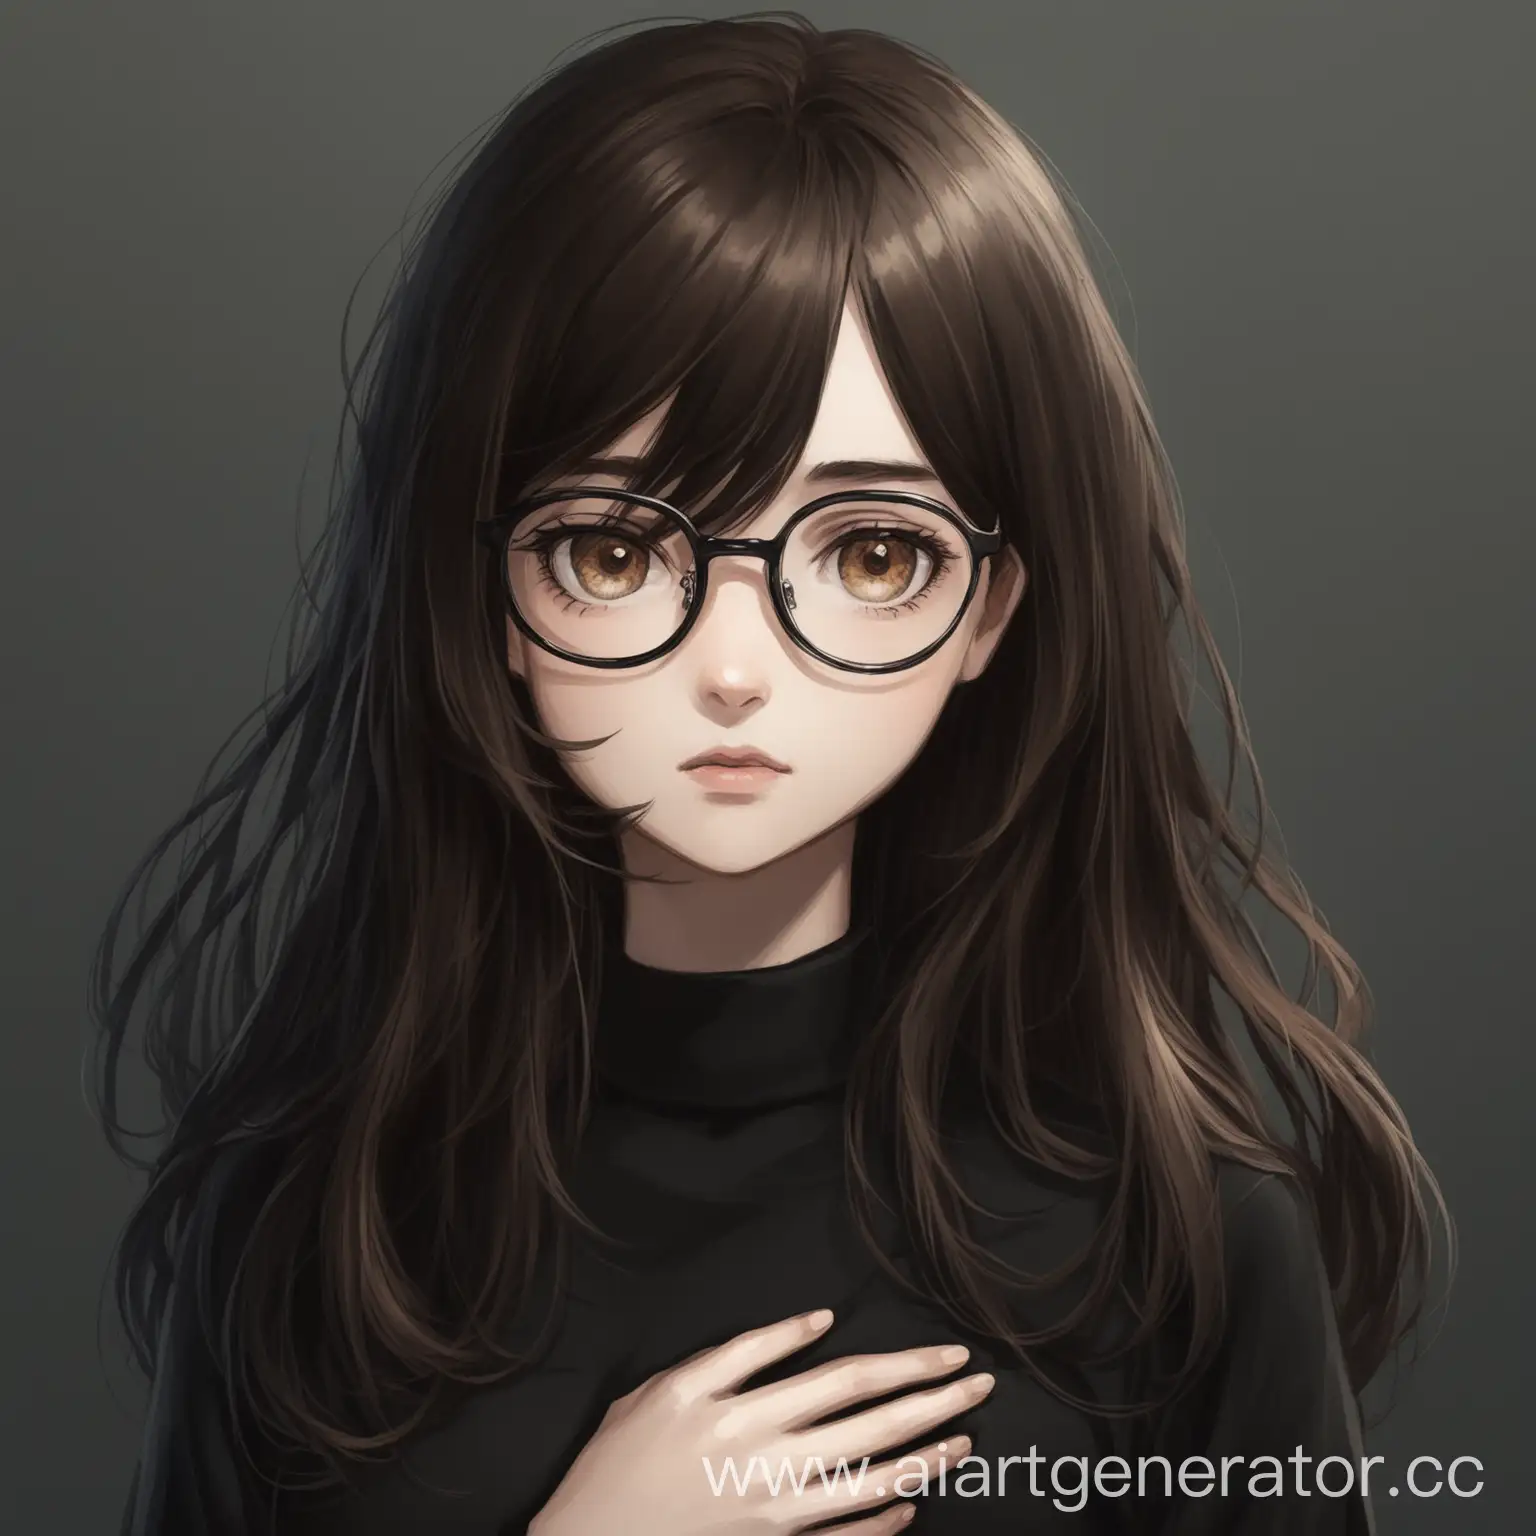 BrownEyed-Girl-in-Glasses-with-Dark-Hair-and-Black-Attire